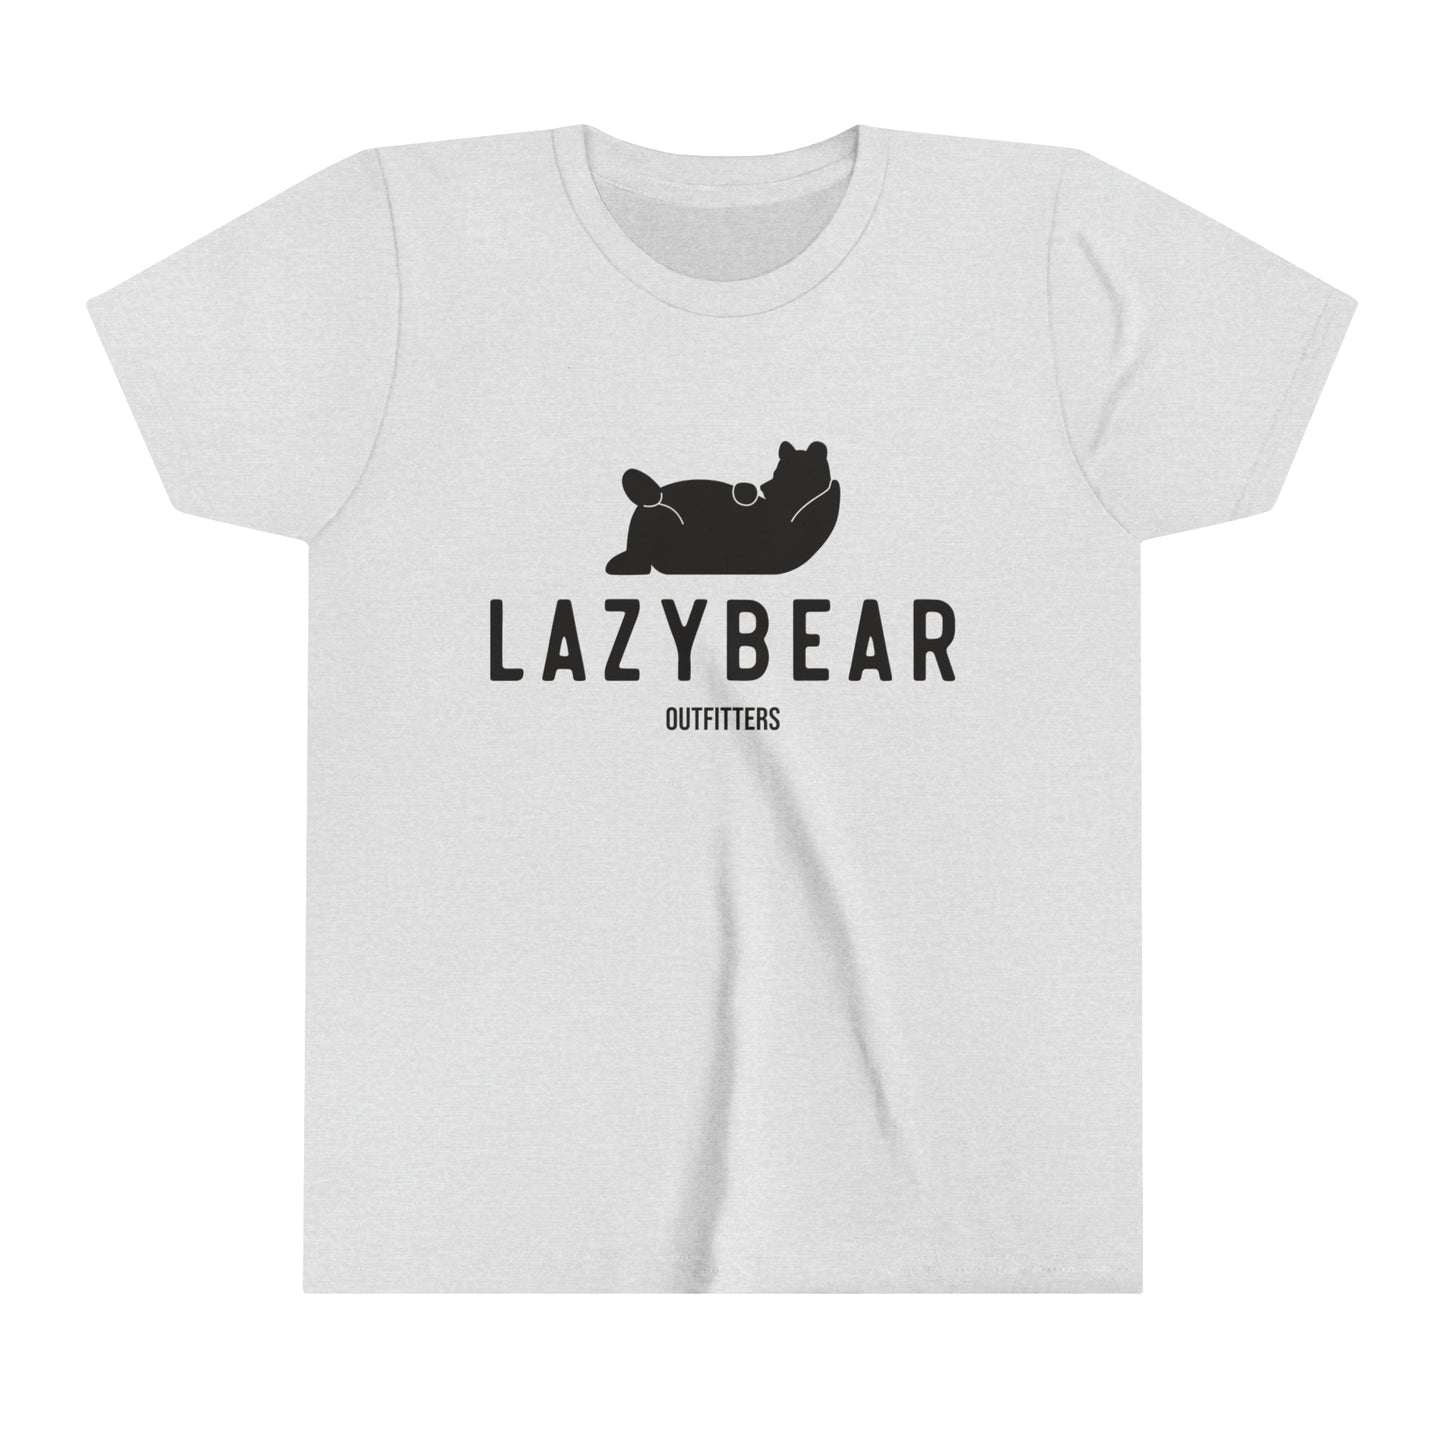 Lazy Bear Outfitters' Kids Tee